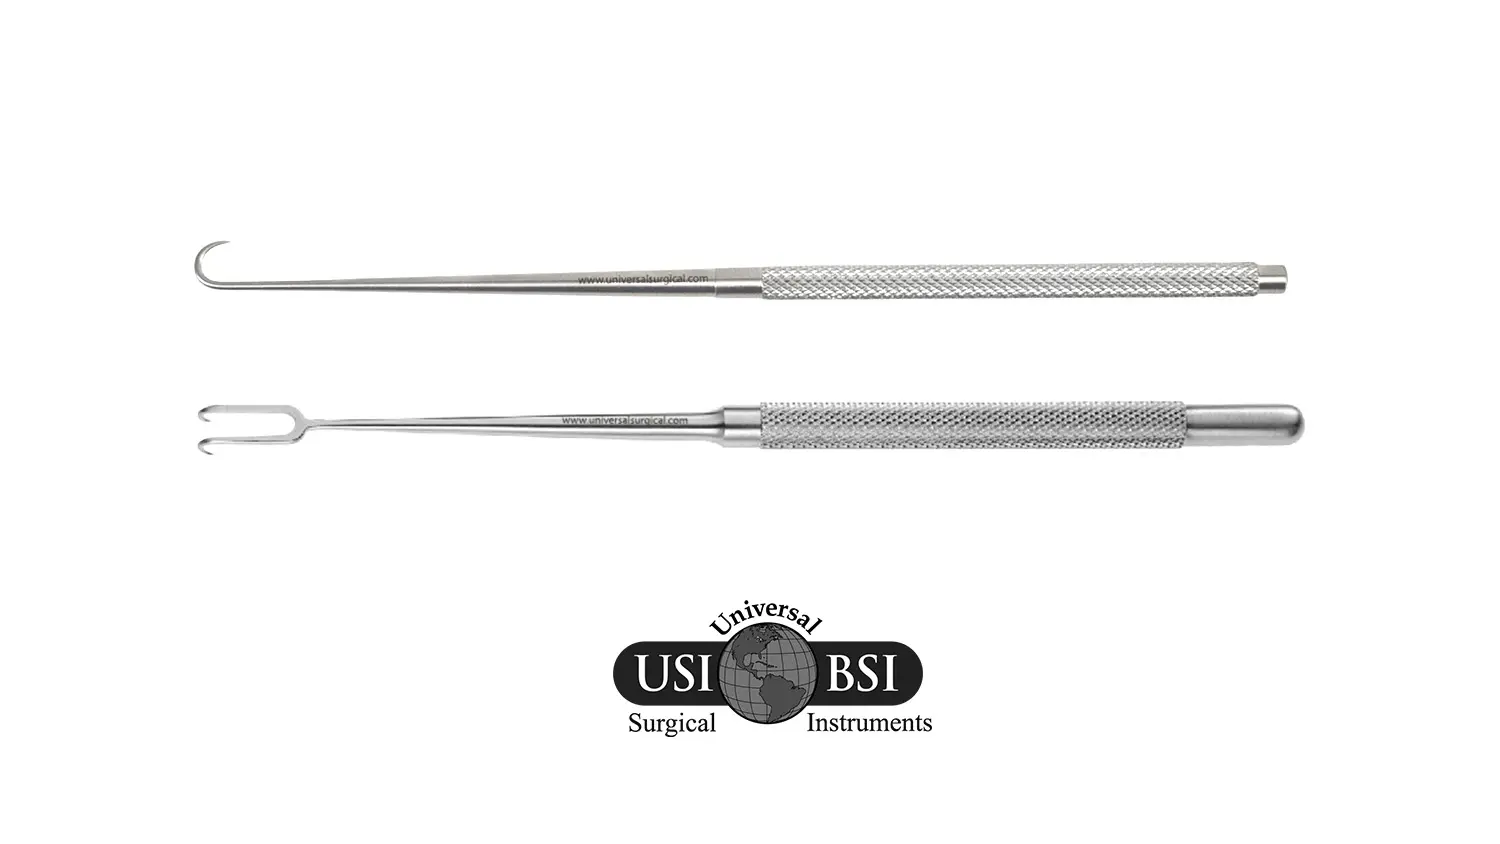 A pair of surgical instruments are shown.